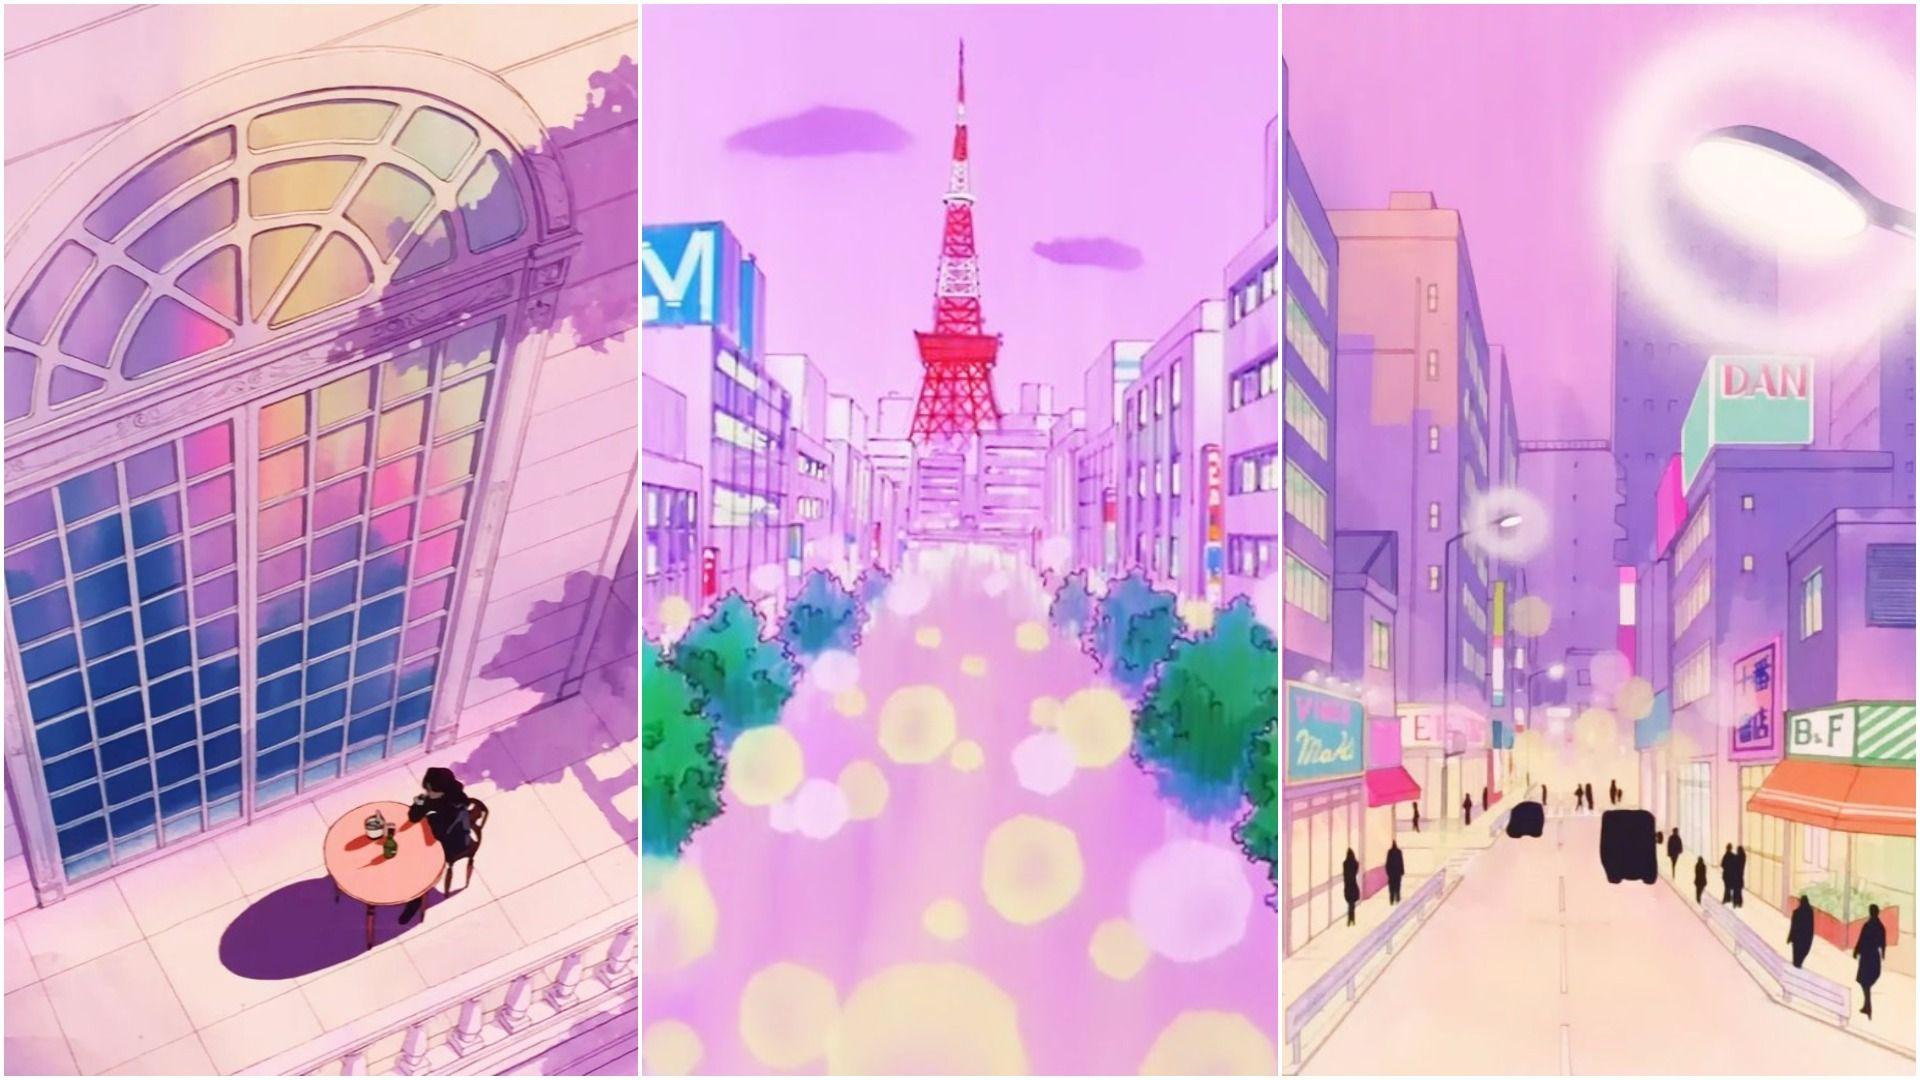 Let's Admire Sailor Moon Anime Scenery. Sailor moon background